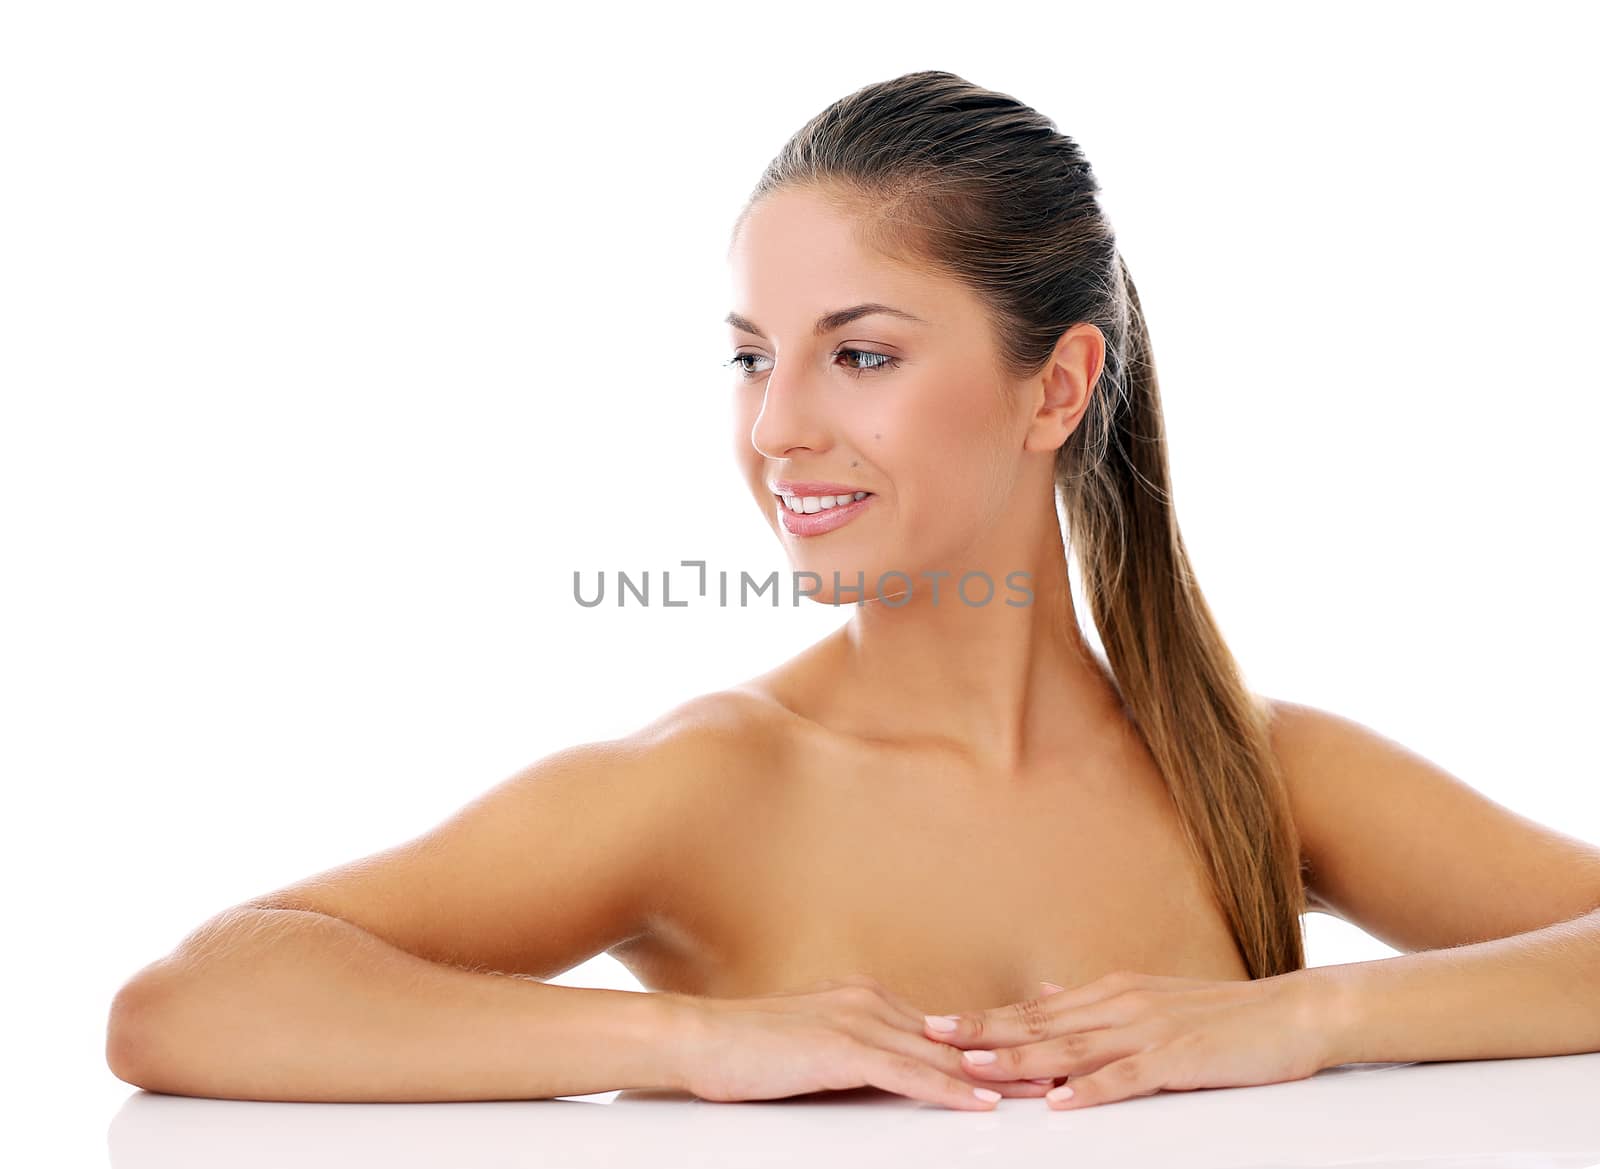 Portrait of a beautiful woman who is posing happily and tenderly over a white background